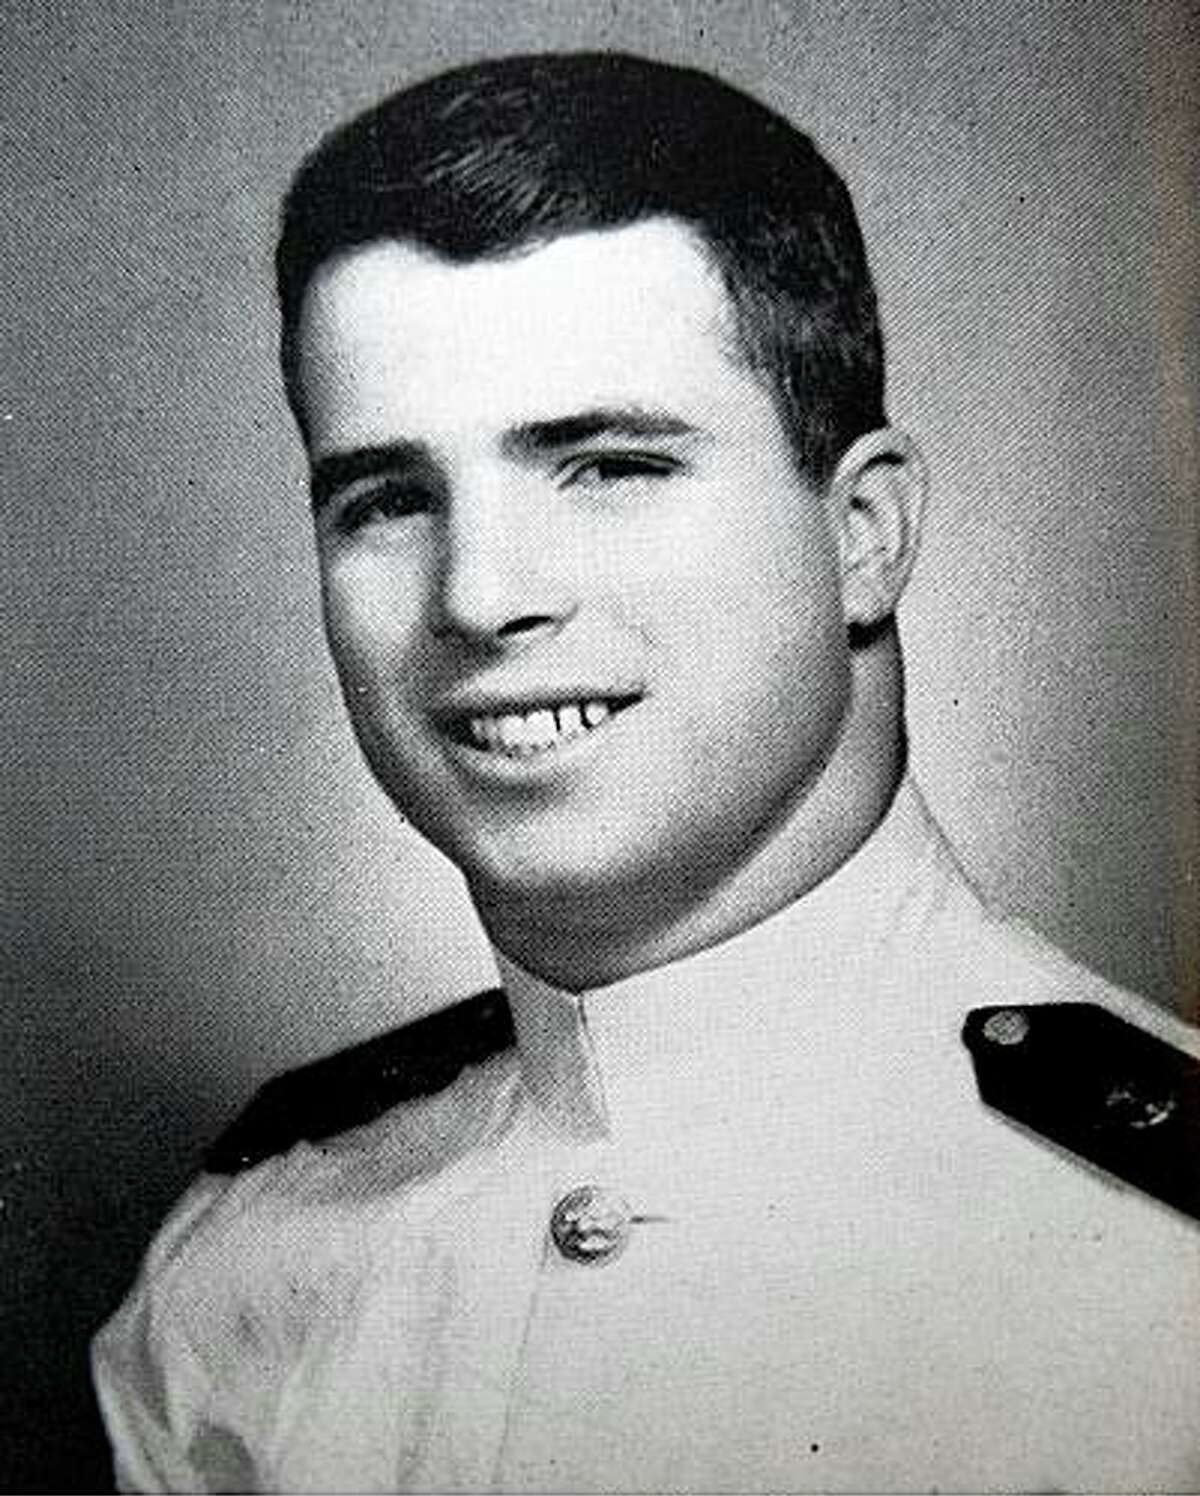 McCain attended the Naval Academy at Annapolis.